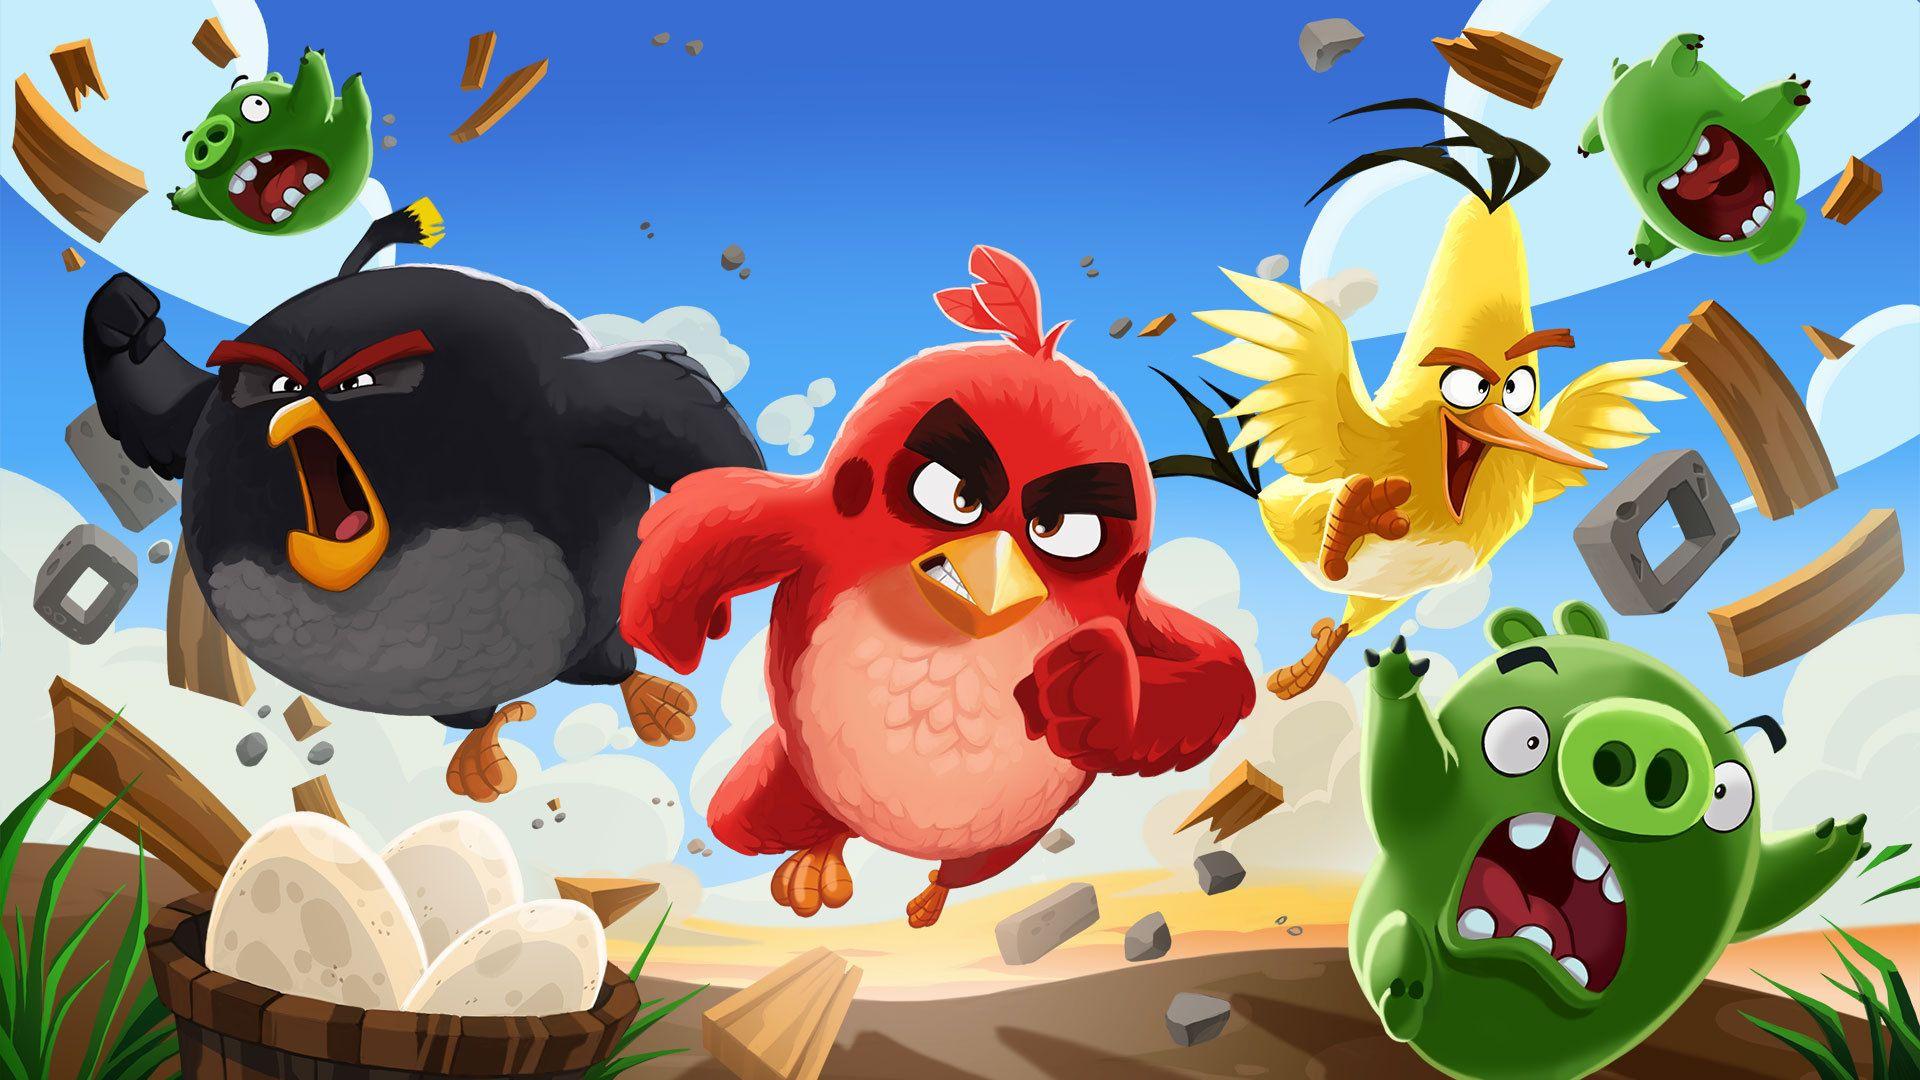 Angry Birds Wallpaper Image Photo Picture Background